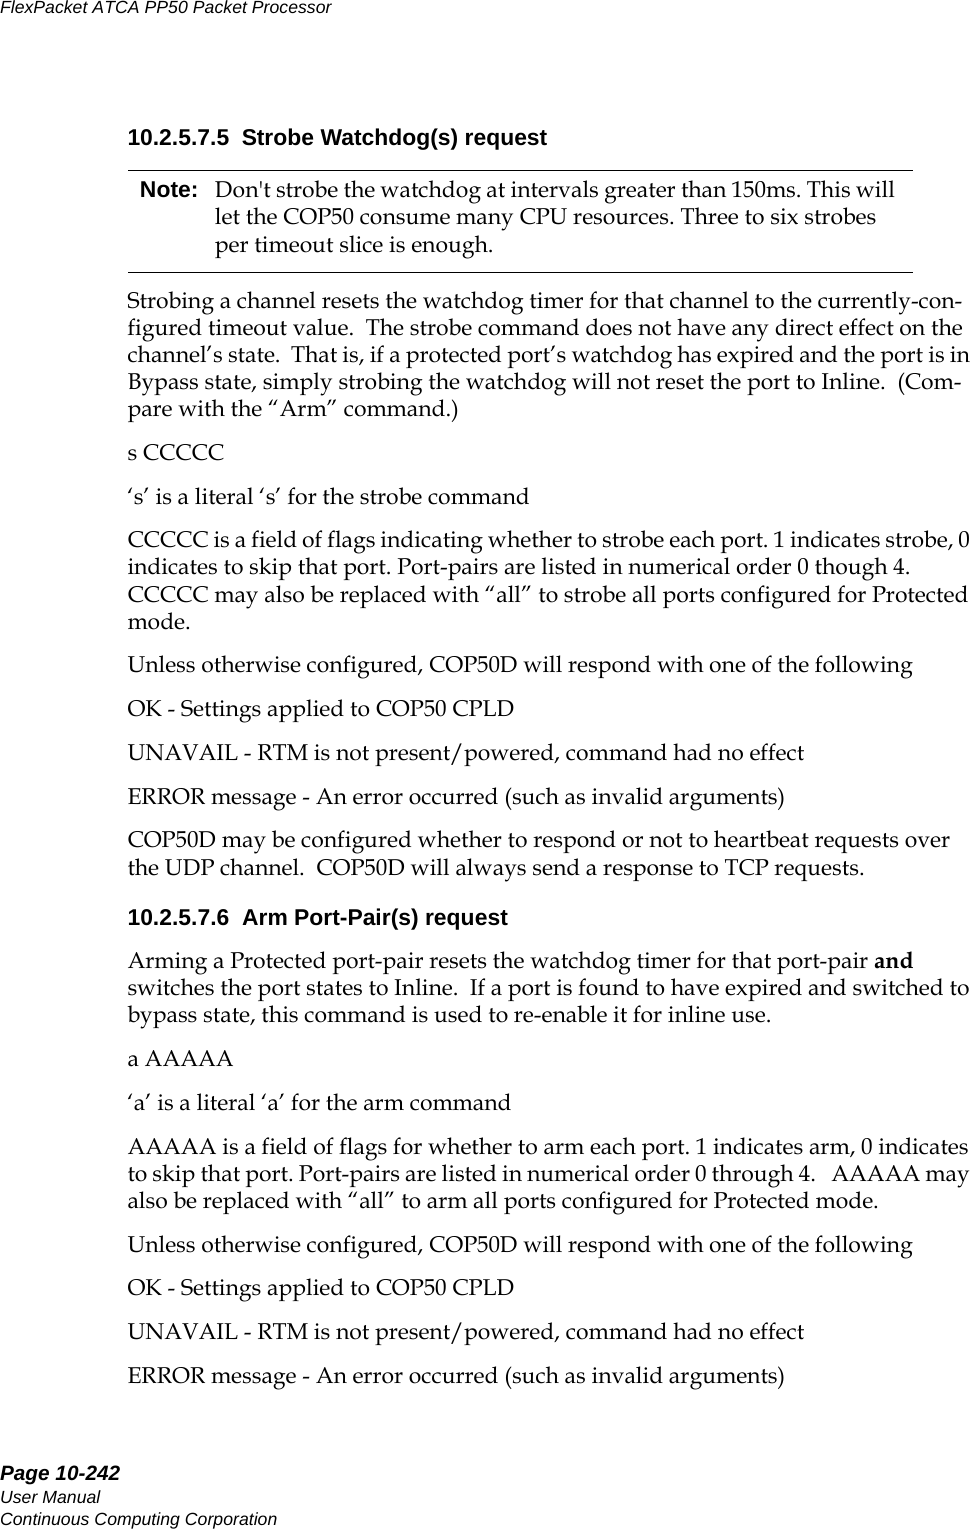 Page 10-242User ManualContinuous Computing CorporationFlexPacket ATCA PP50 Packet Processor     Preliminary10.2.5.7.5  Strobe Watchdog(s) requestStrobing a channel resets the watchdog timer for that channel to the currently-con-figured timeout value.  The strobe command does not have any direct effect on the channel’s state.  That is, if a protected port’s watchdog has expired and the port is in Bypass state, simply strobing the watchdog will not reset the port to Inline.  (Com-pare with the “Arm” command.)s CCCCC‘s’ is a literal ‘s’ for the strobe commandCCCCC is a field of flags indicating whether to strobe each port. 1 indicates strobe, 0 indicates to skip that port. Port-pairs are listed in numerical order 0 though 4. CCCCC may also be replaced with “all” to strobe all ports configured for Protected mode.Unless otherwise configured, COP50D will respond with one of the followingOK - Settings applied to COP50 CPLDUNAVAIL - RTM is not present/powered, command had no effectERROR message - An error occurred (such as invalid arguments)COP50D may be configured whether to respond or not to heartbeat requests over the UDP channel.  COP50D will always send a response to TCP requests.10.2.5.7.6  Arm Port-Pair(s) requestArming a Protected port-pair resets the watchdog timer for that port-pair and switches the port states to Inline.  If a port is found to have expired and switched to bypass state, this command is used to re-enable it for inline use.a AAAAA‘a’ is a literal ‘a’ for the arm commandAAAAA is a field of flags for whether to arm each port. 1 indicates arm, 0 indicates to skip that port. Port-pairs are listed in numerical order 0 through 4.   AAAAA may also be replaced with “all” to arm all ports configured for Protected mode.Unless otherwise configured, COP50D will respond with one of the followingOK - Settings applied to COP50 CPLDUNAVAIL - RTM is not present/powered, command had no effectERROR message - An error occurred (such as invalid arguments)Note: Don&apos;t strobe the watchdog at intervals greater than 150ms. This will let the COP50 consume many CPU resources. Three to six strobes per timeout slice is enough.